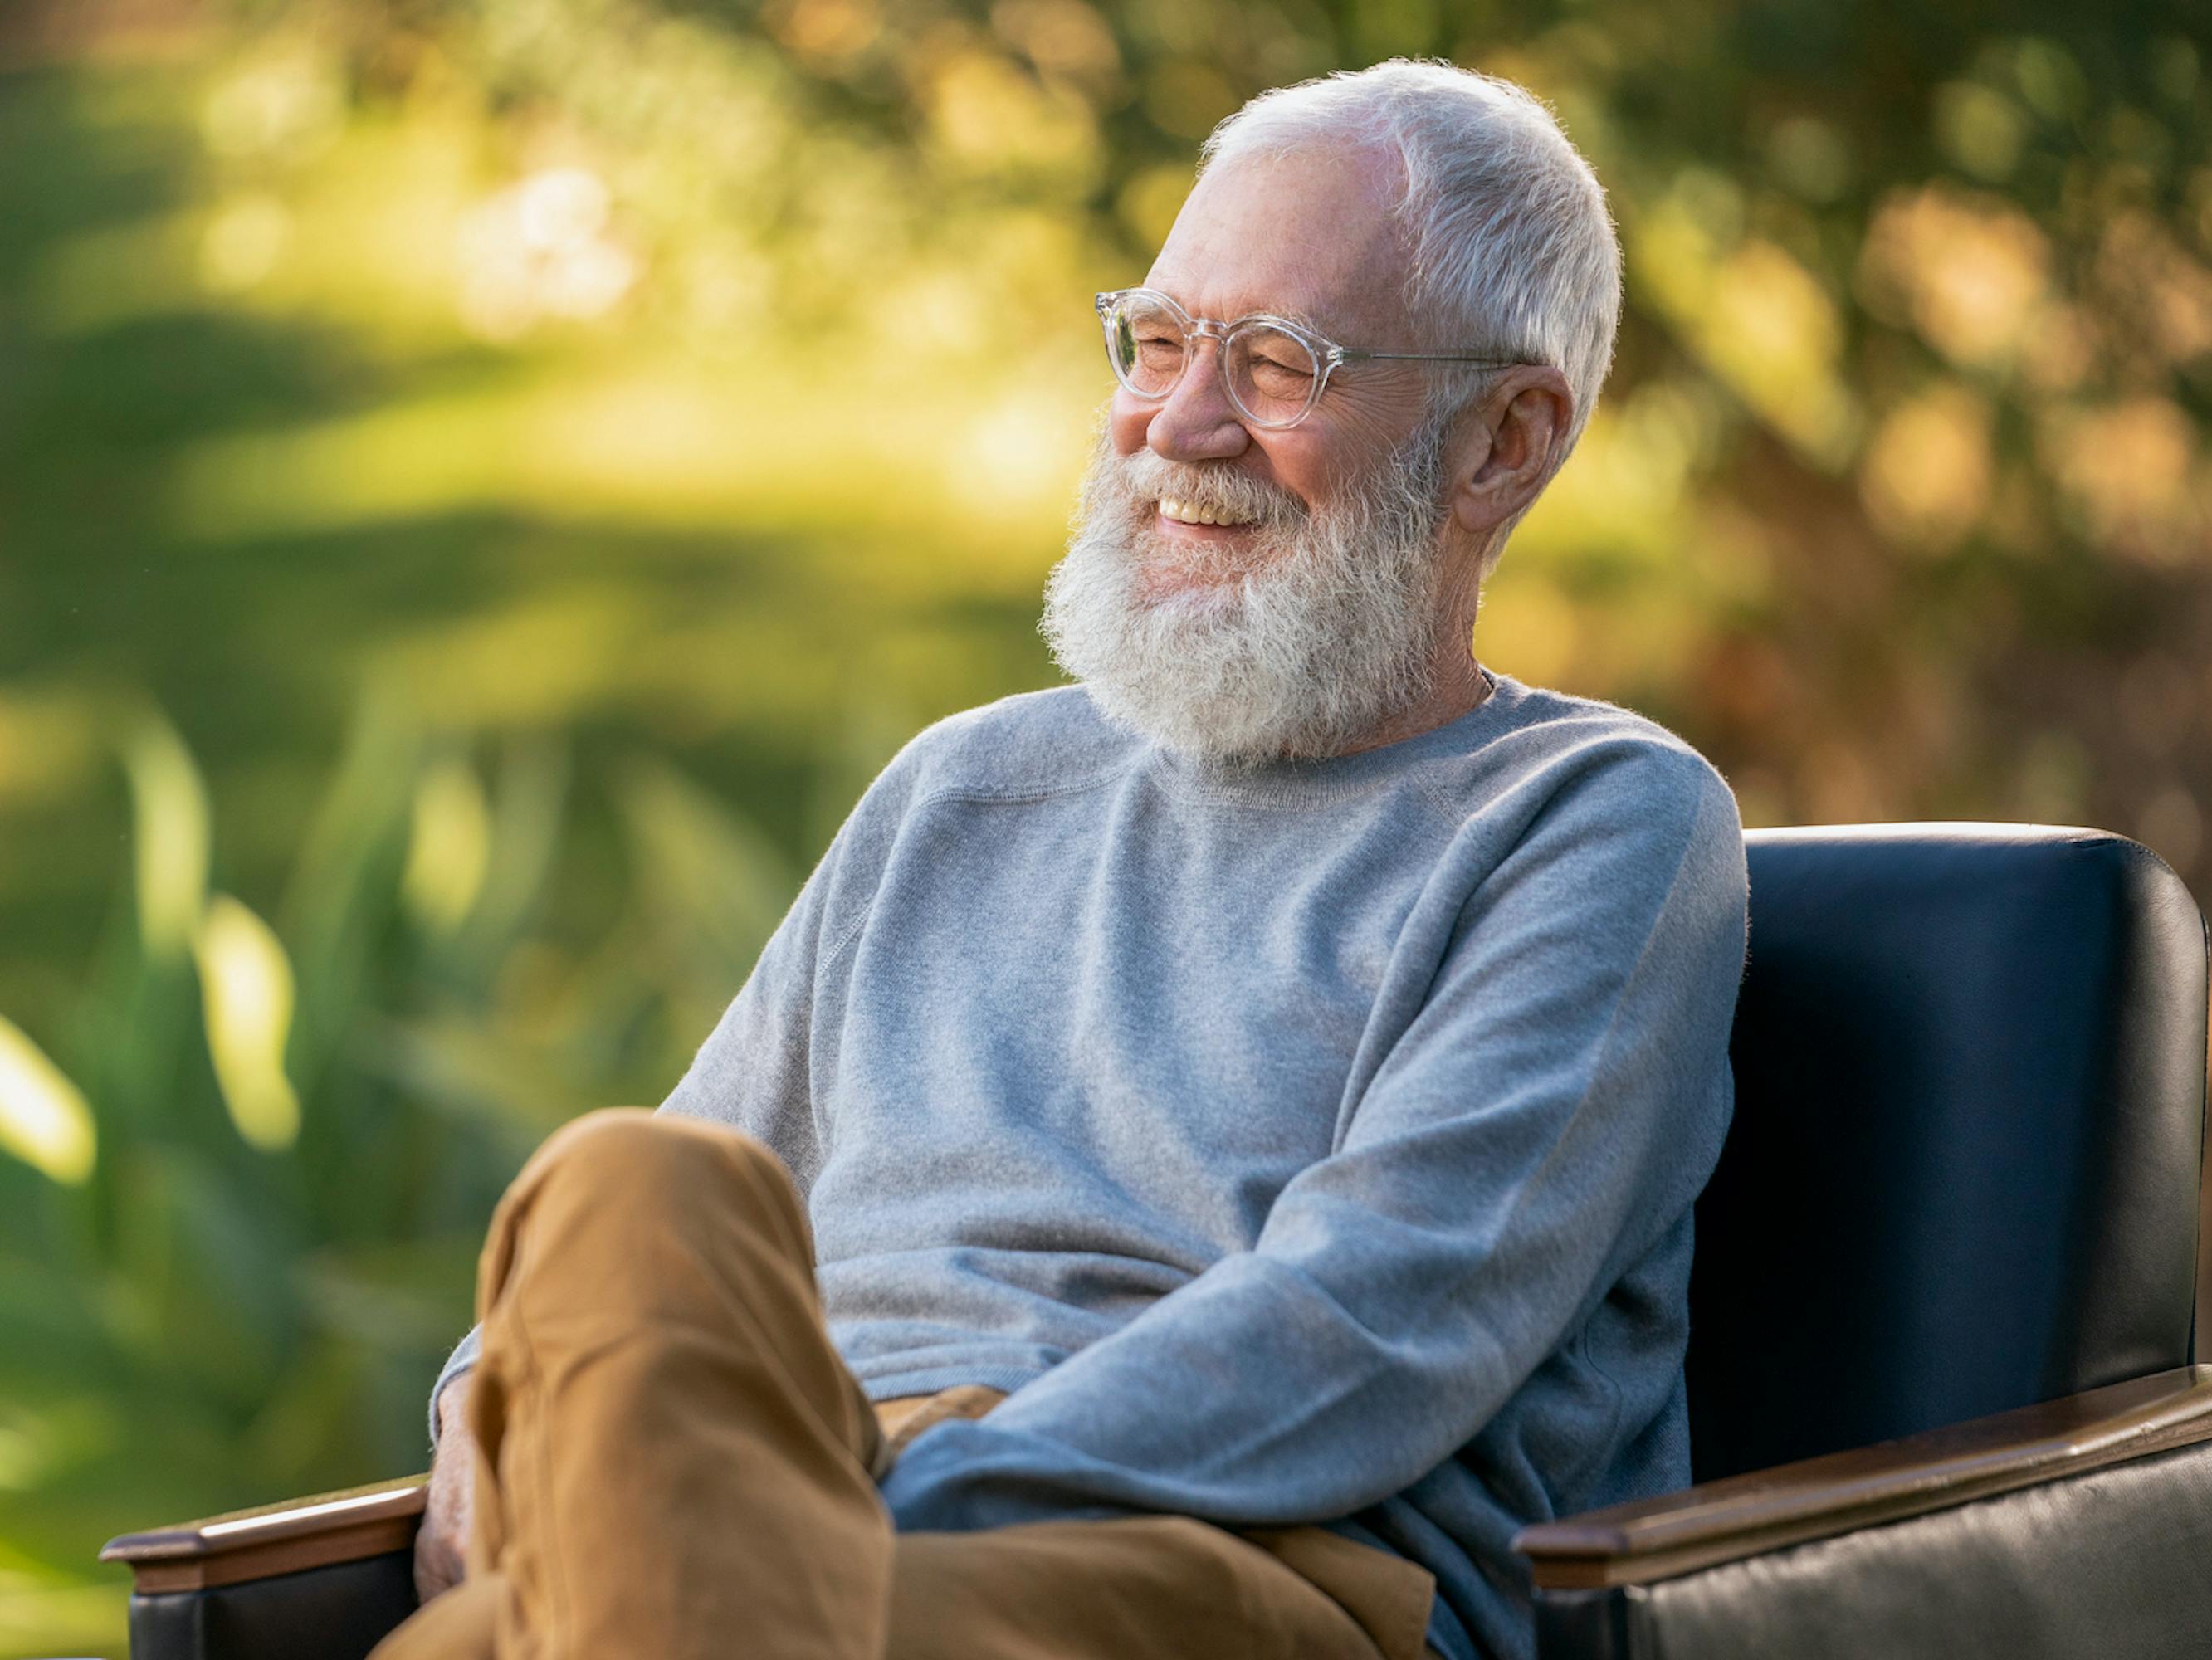 David Letterman wears khakis and a blue sweater and sits in a sun-dappled scneen. 